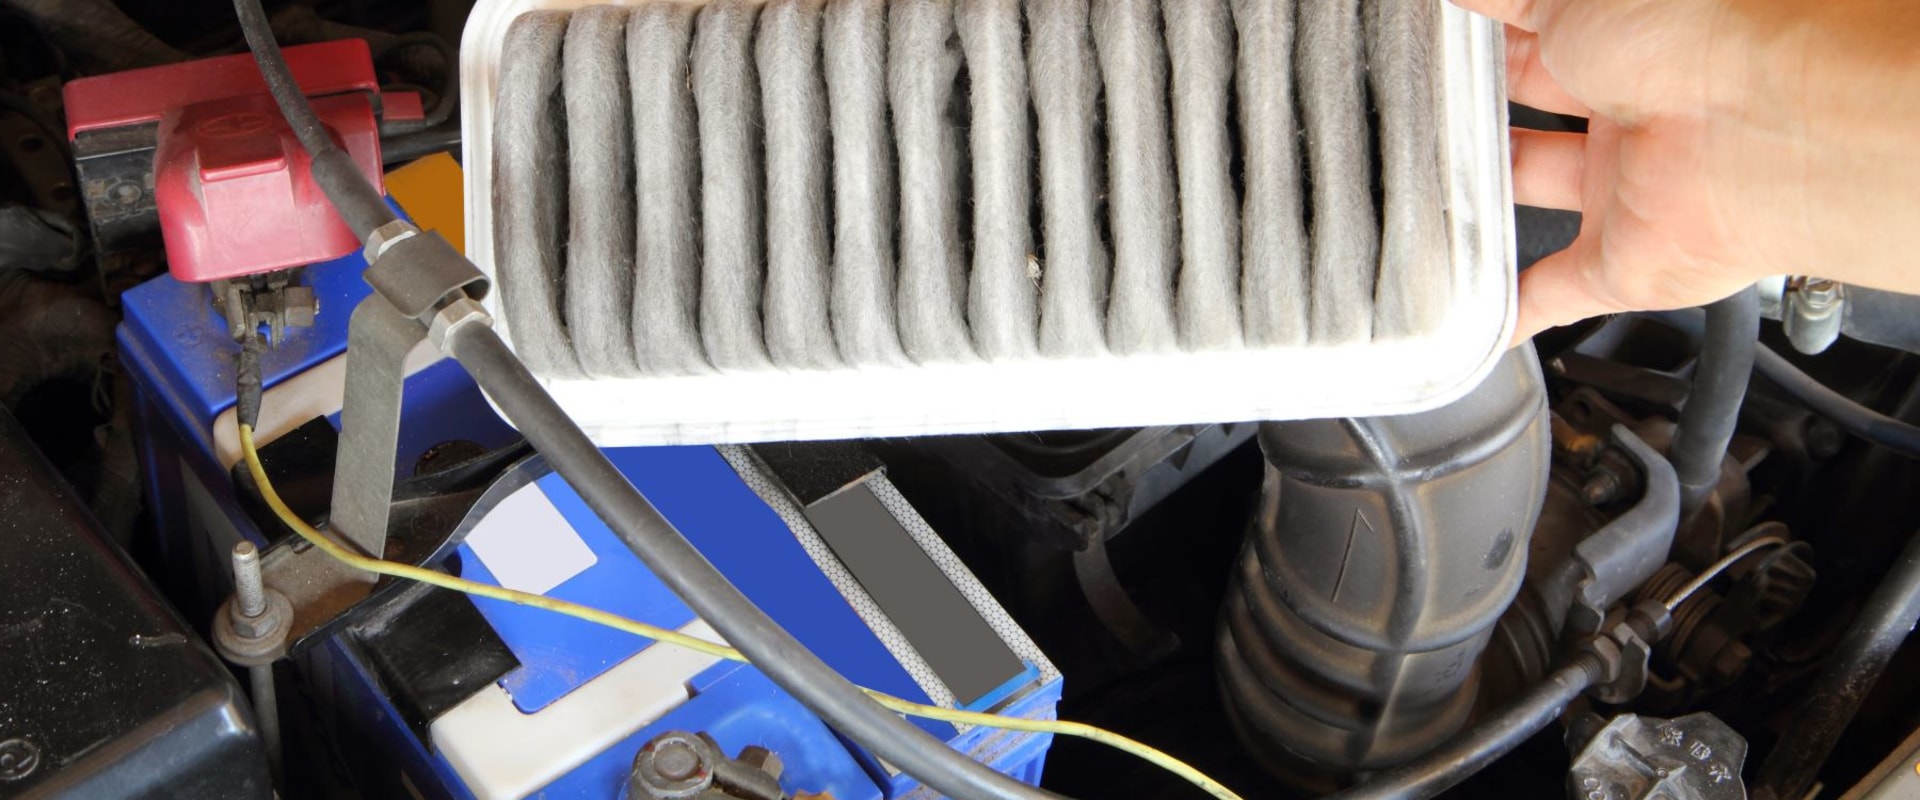 What will happen to your car engine if you use wrong air filter?